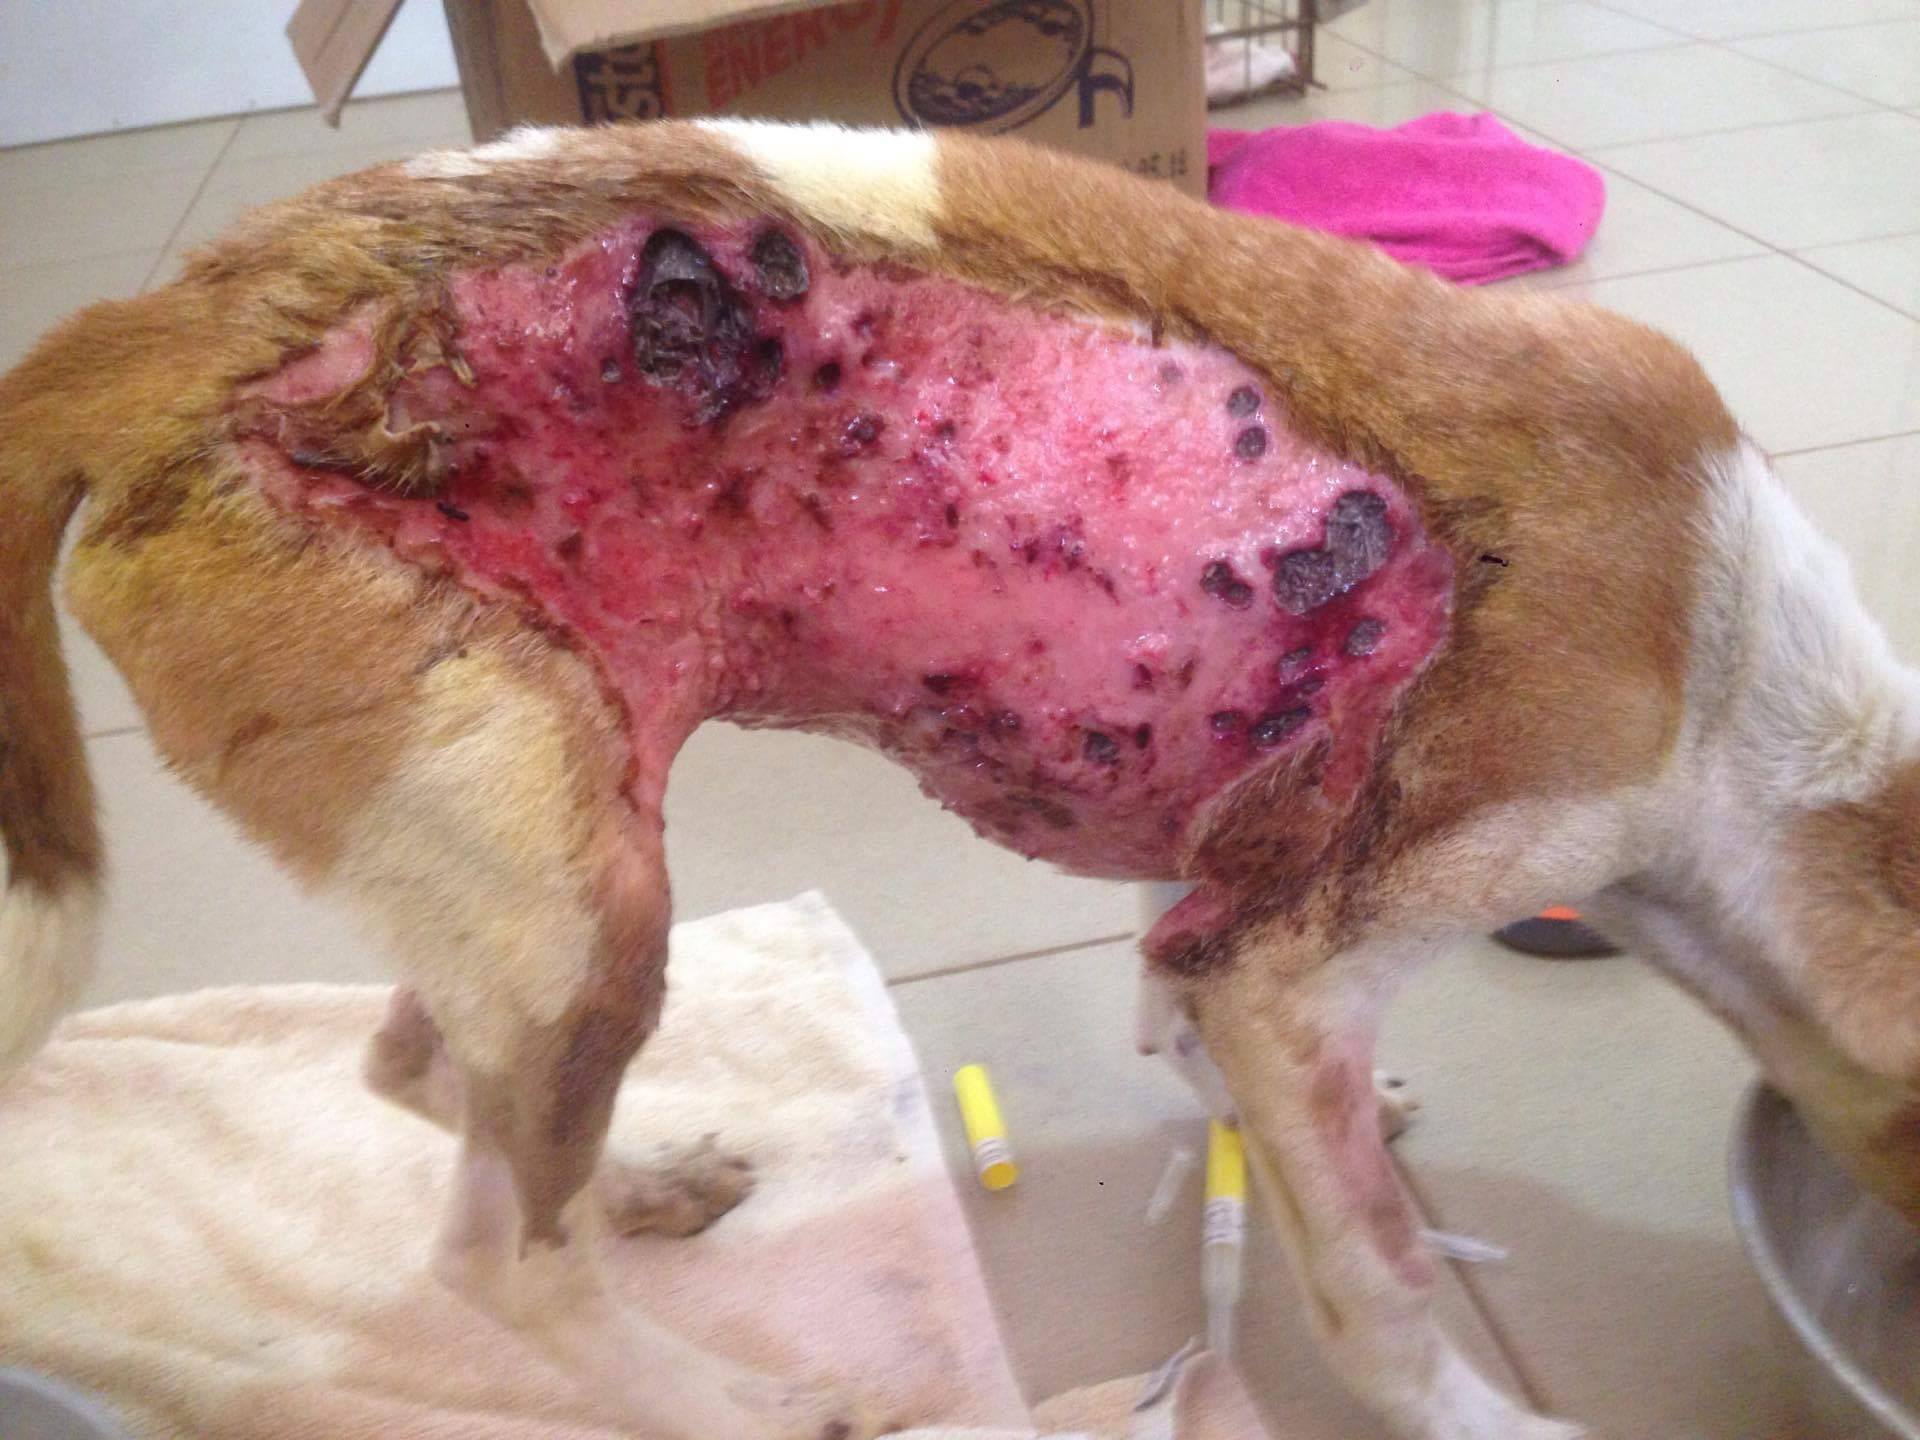 Browny, an owned dog who had boiling water thrown at her